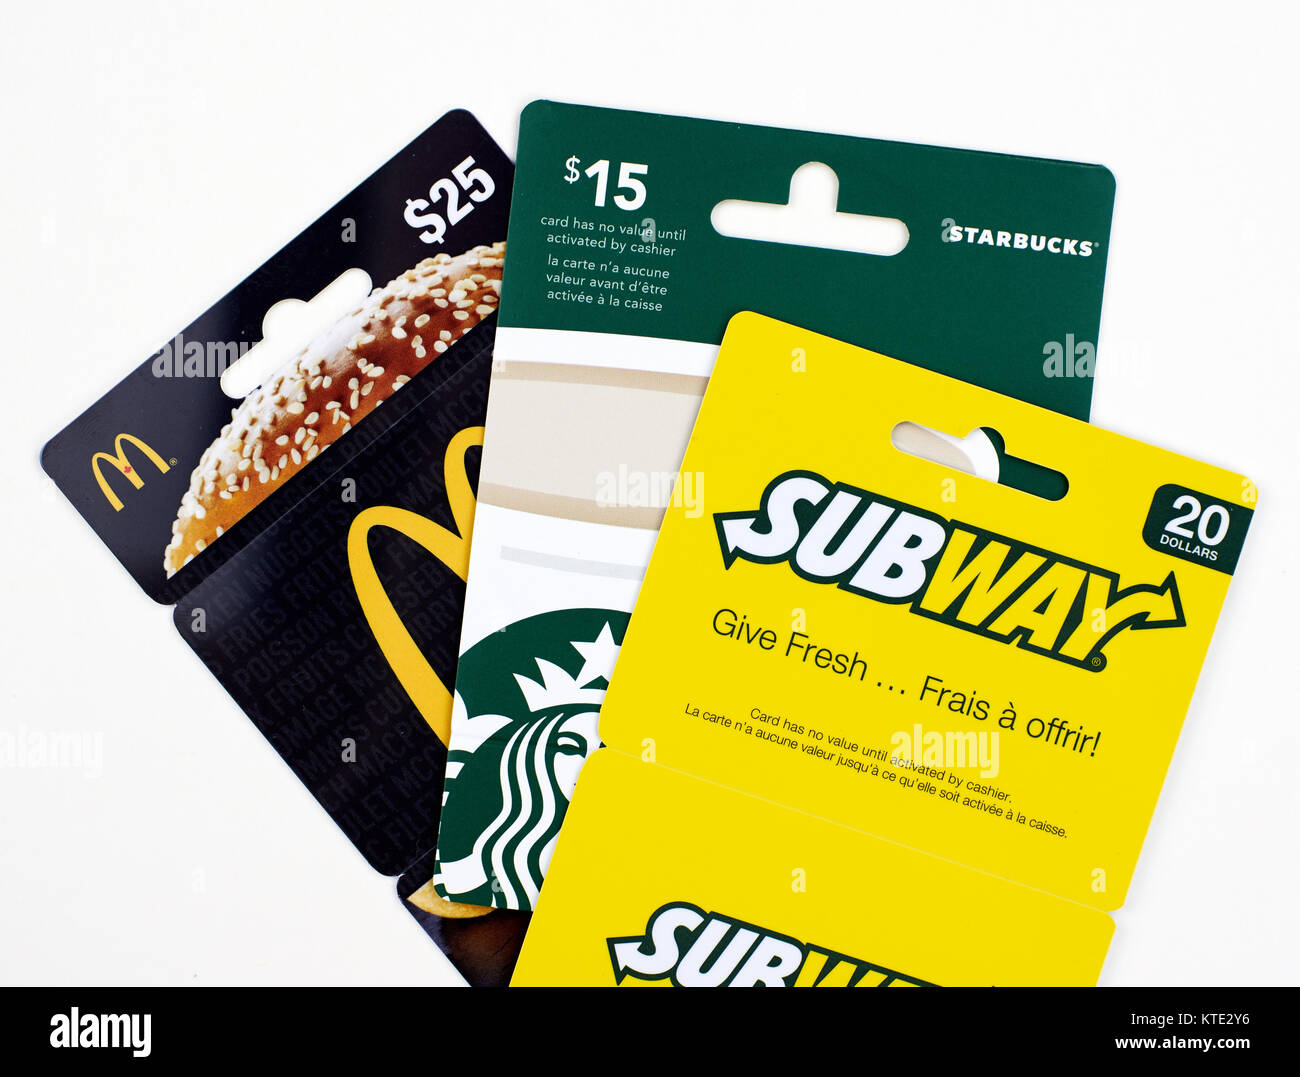 Starbucks Card High Resolution Stock Photography and